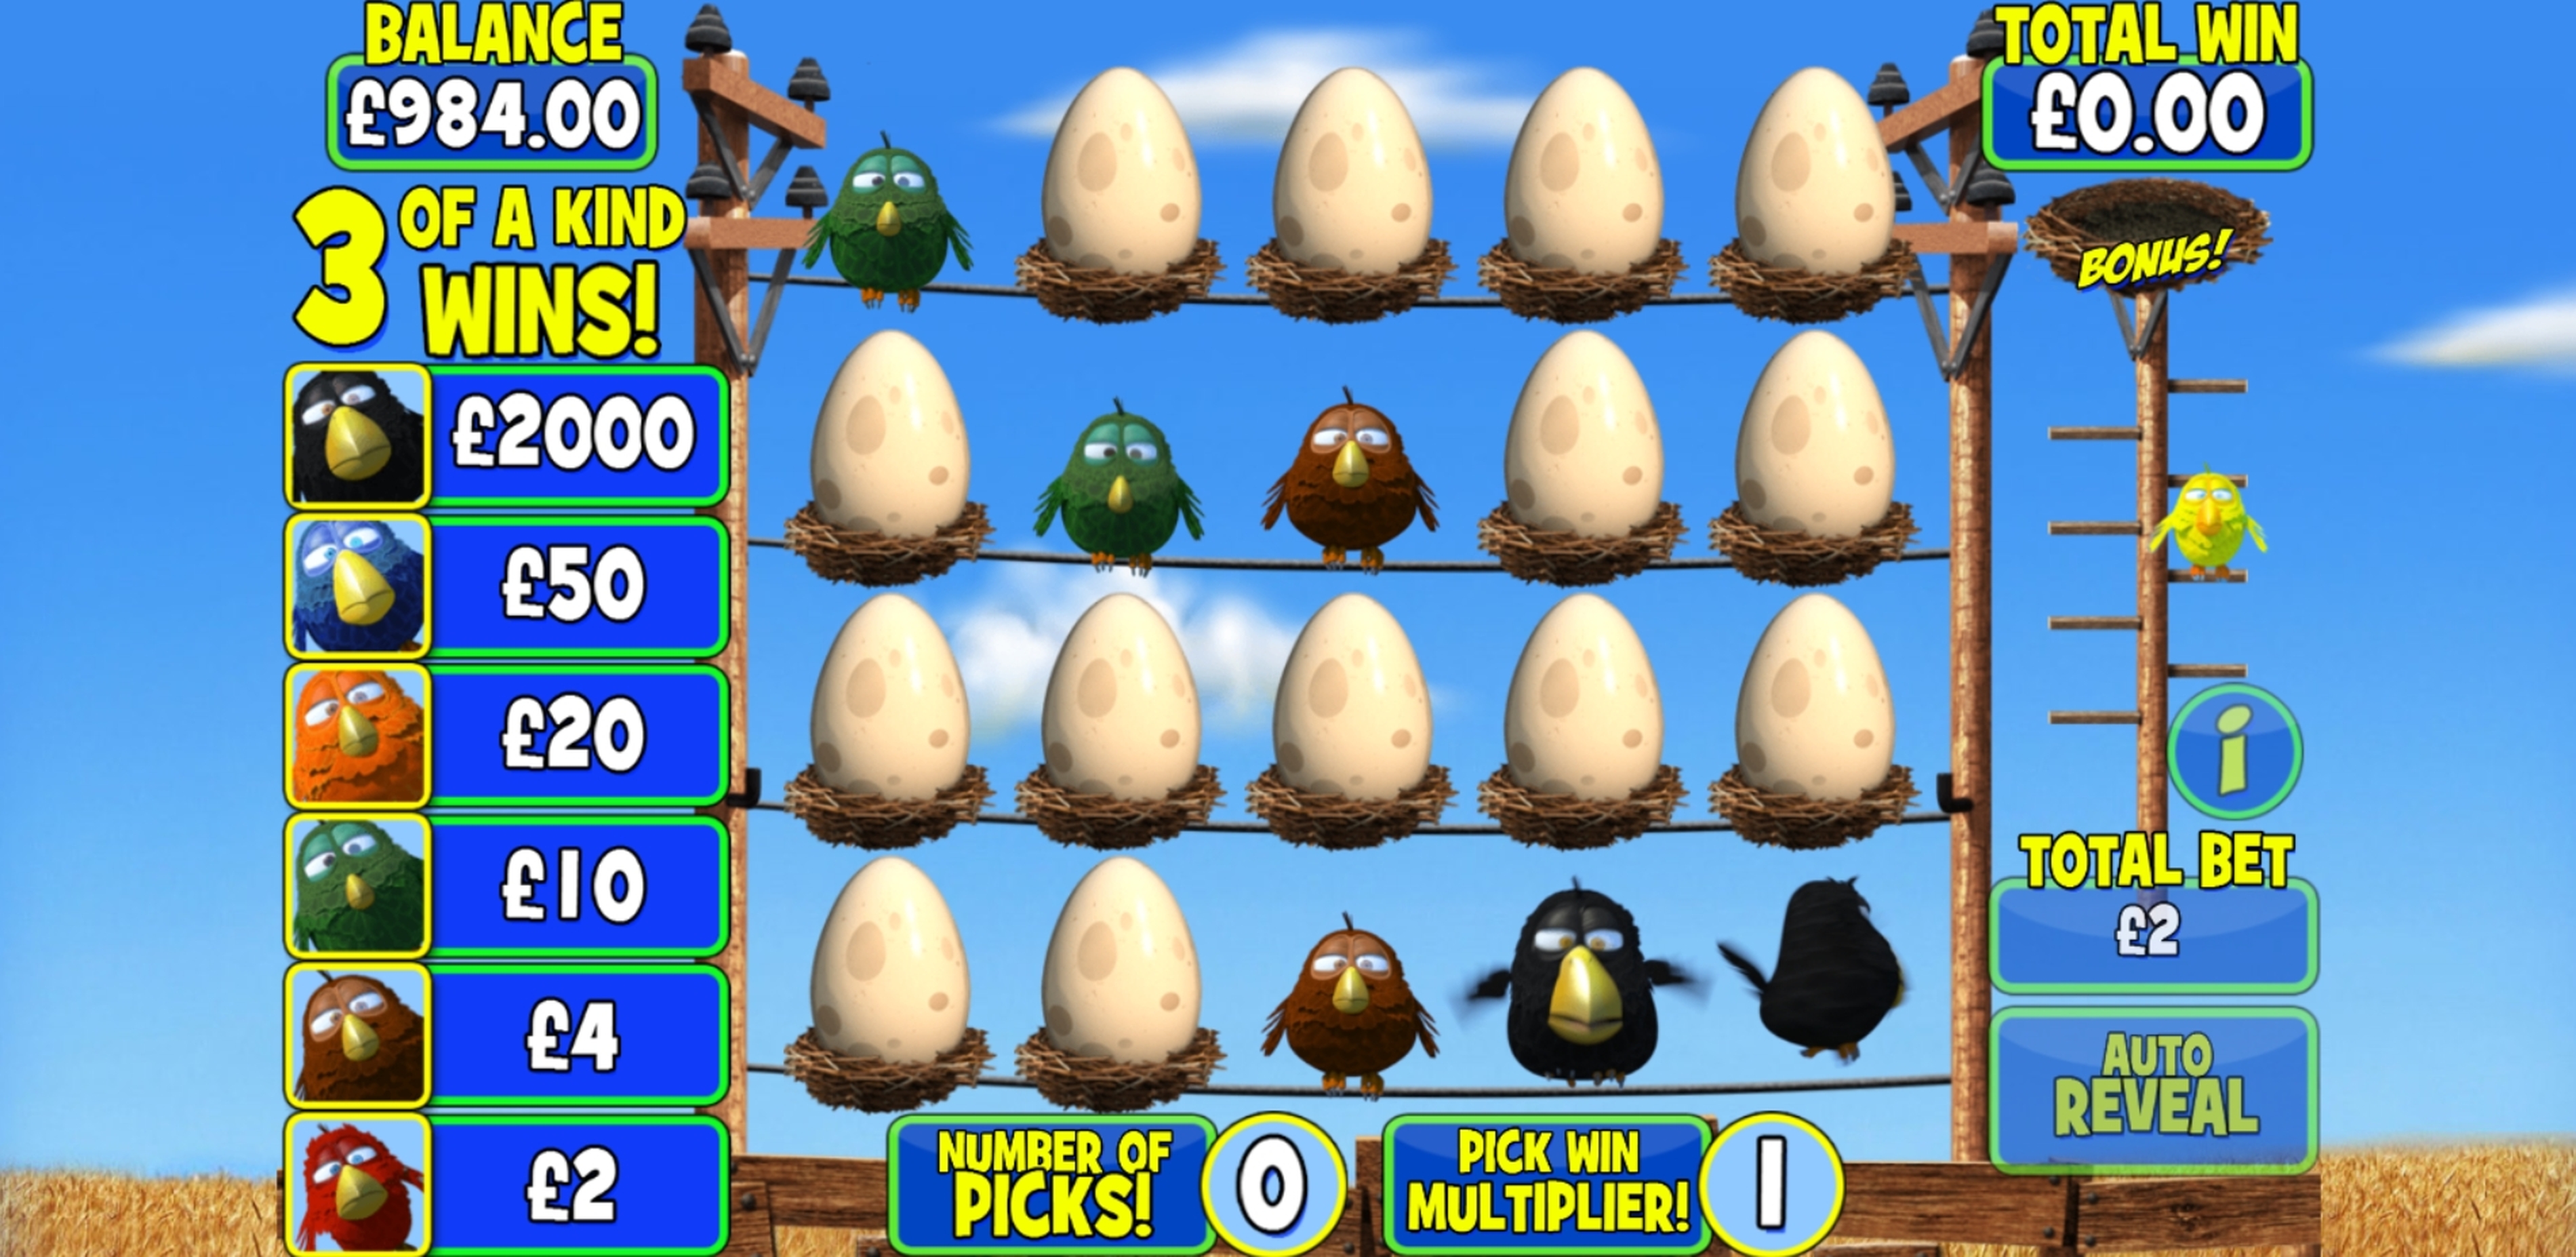 Win Money in Birdz Instant Win Free Slot Game by Games Warehouse